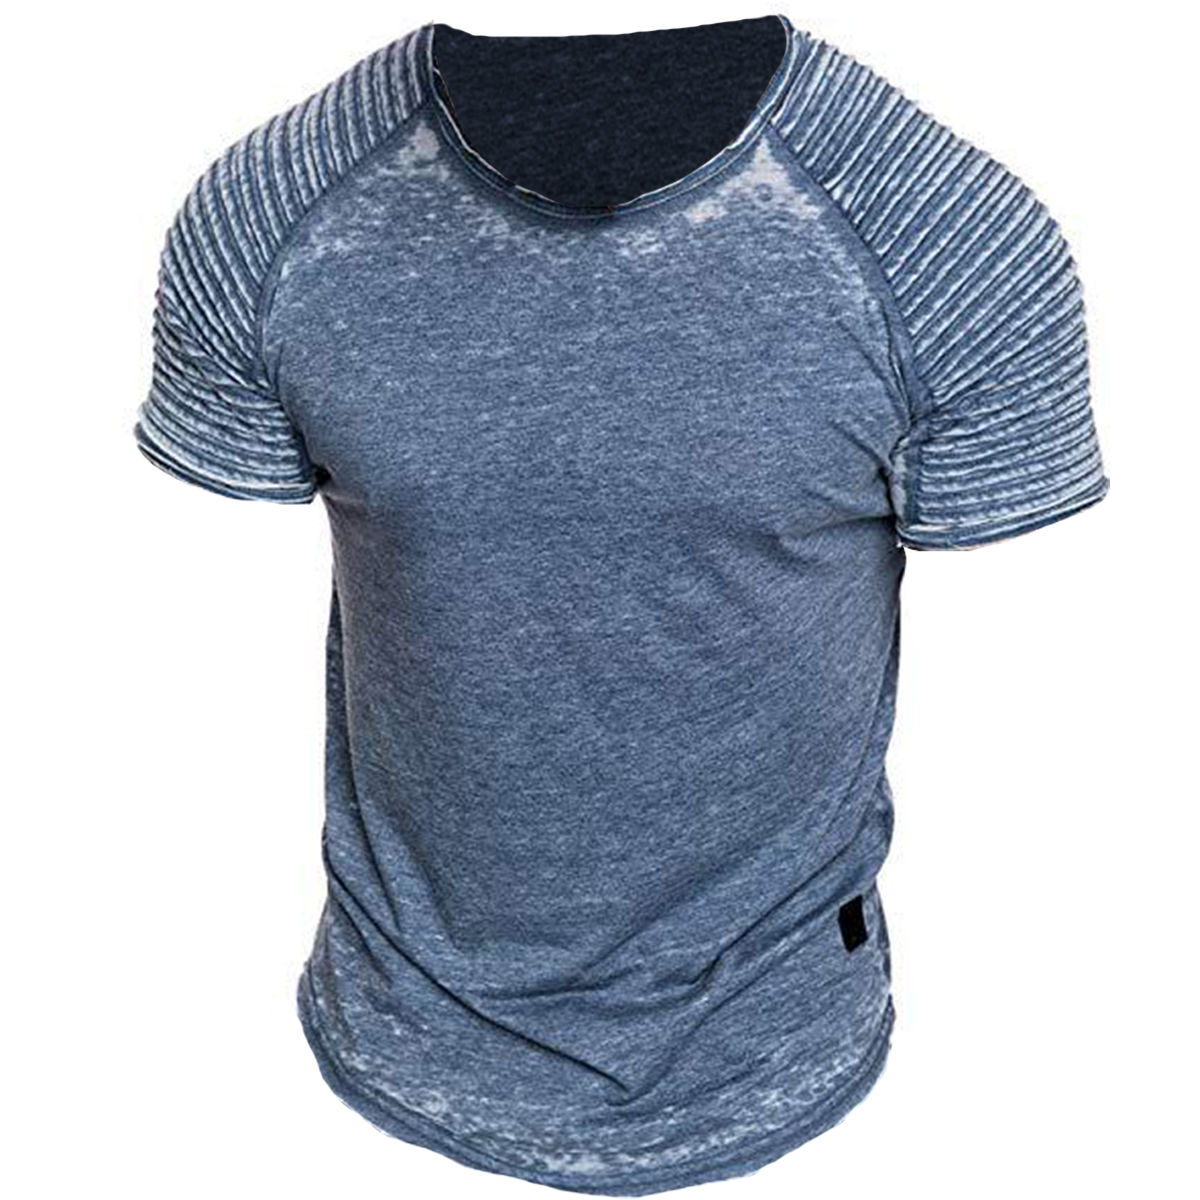 Men's Casual Pleated Round Neck Chic Short Sleeve T-shirt